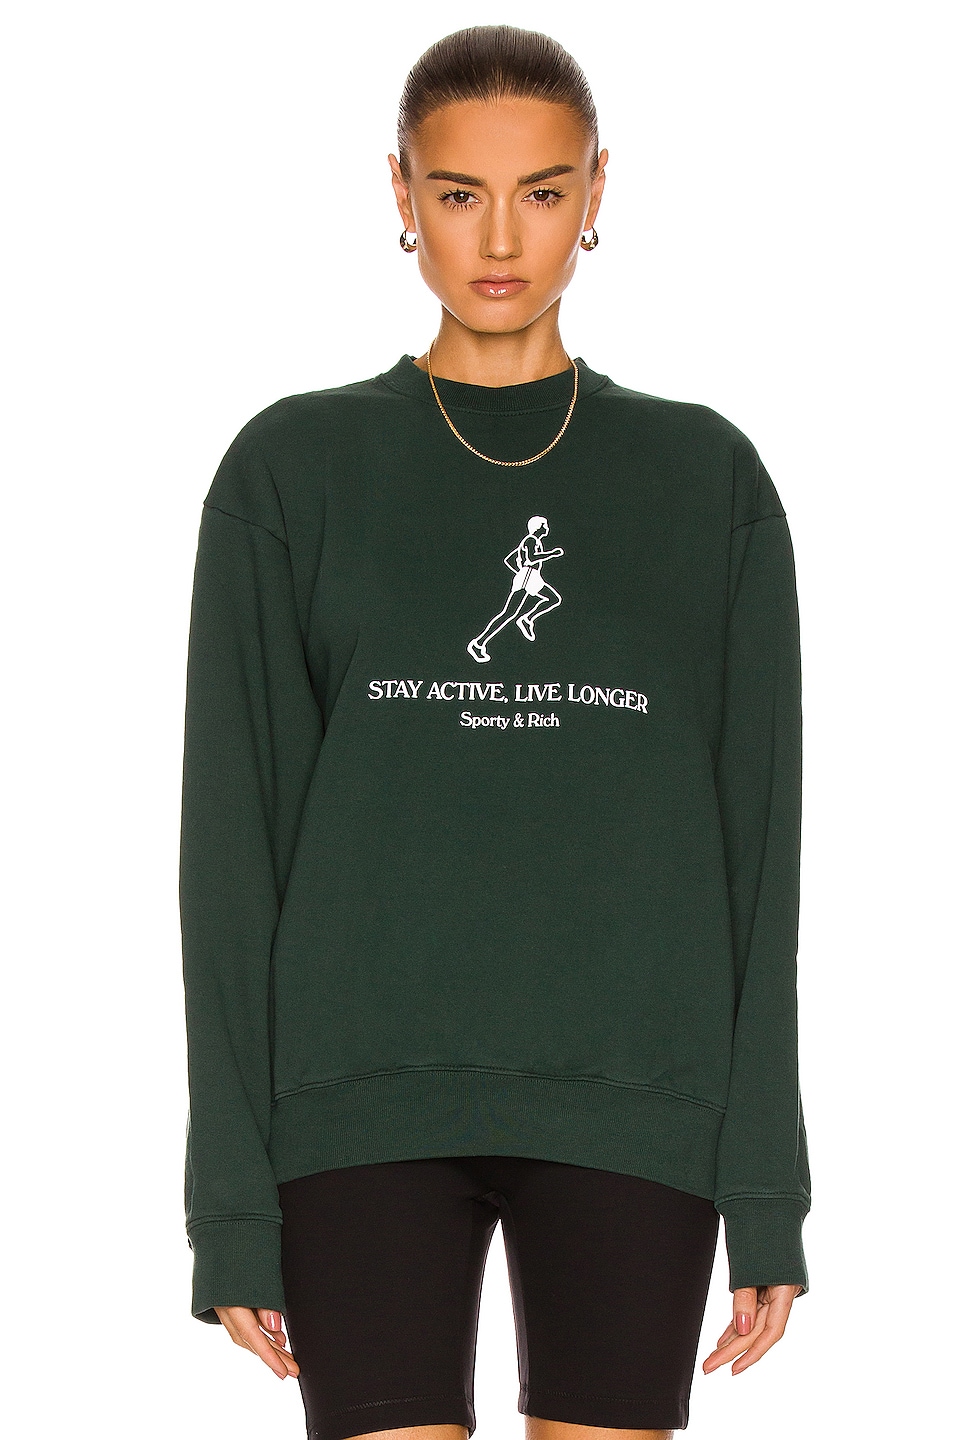 Image 1 of Sporty & Rich Live Longer Sweatshirt in Forest Green & White